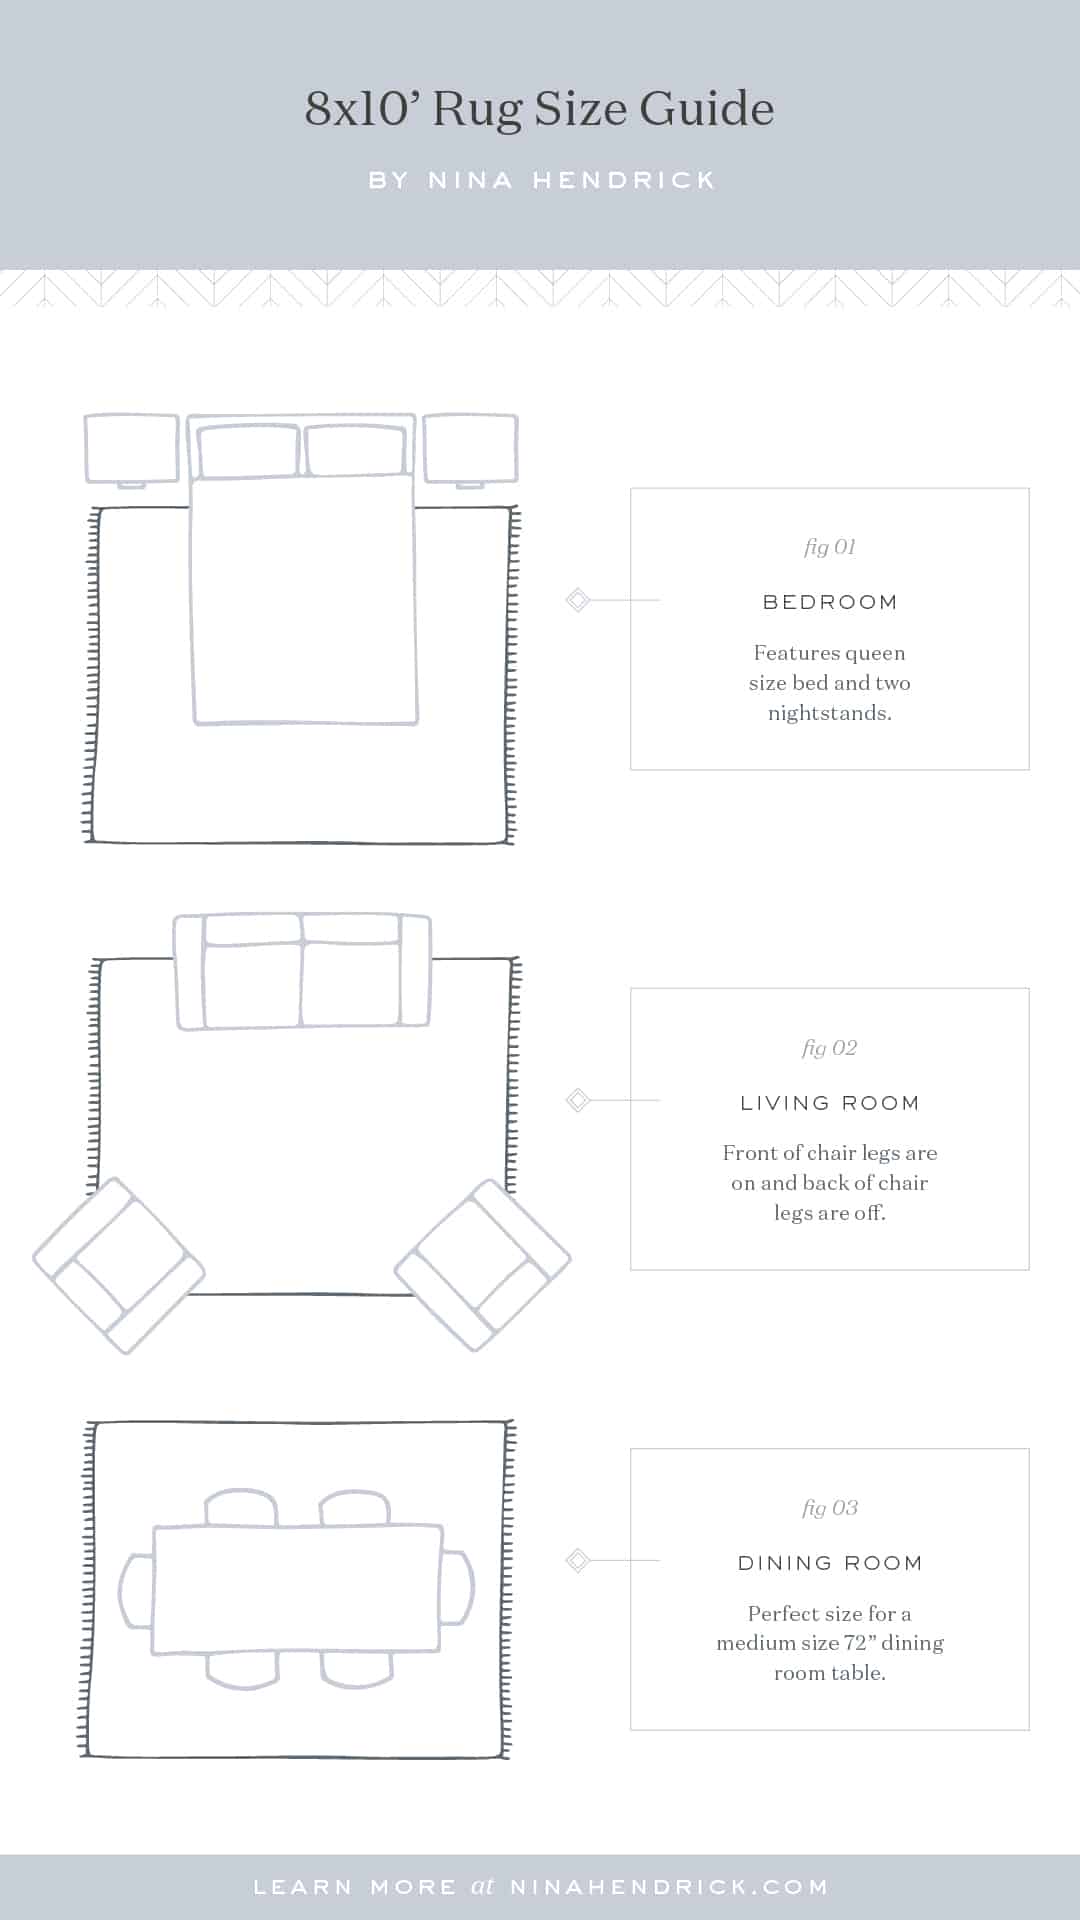 8x10' size area rug size guide graphic with tips for furniture placement in a bedroom, living room, and dining room